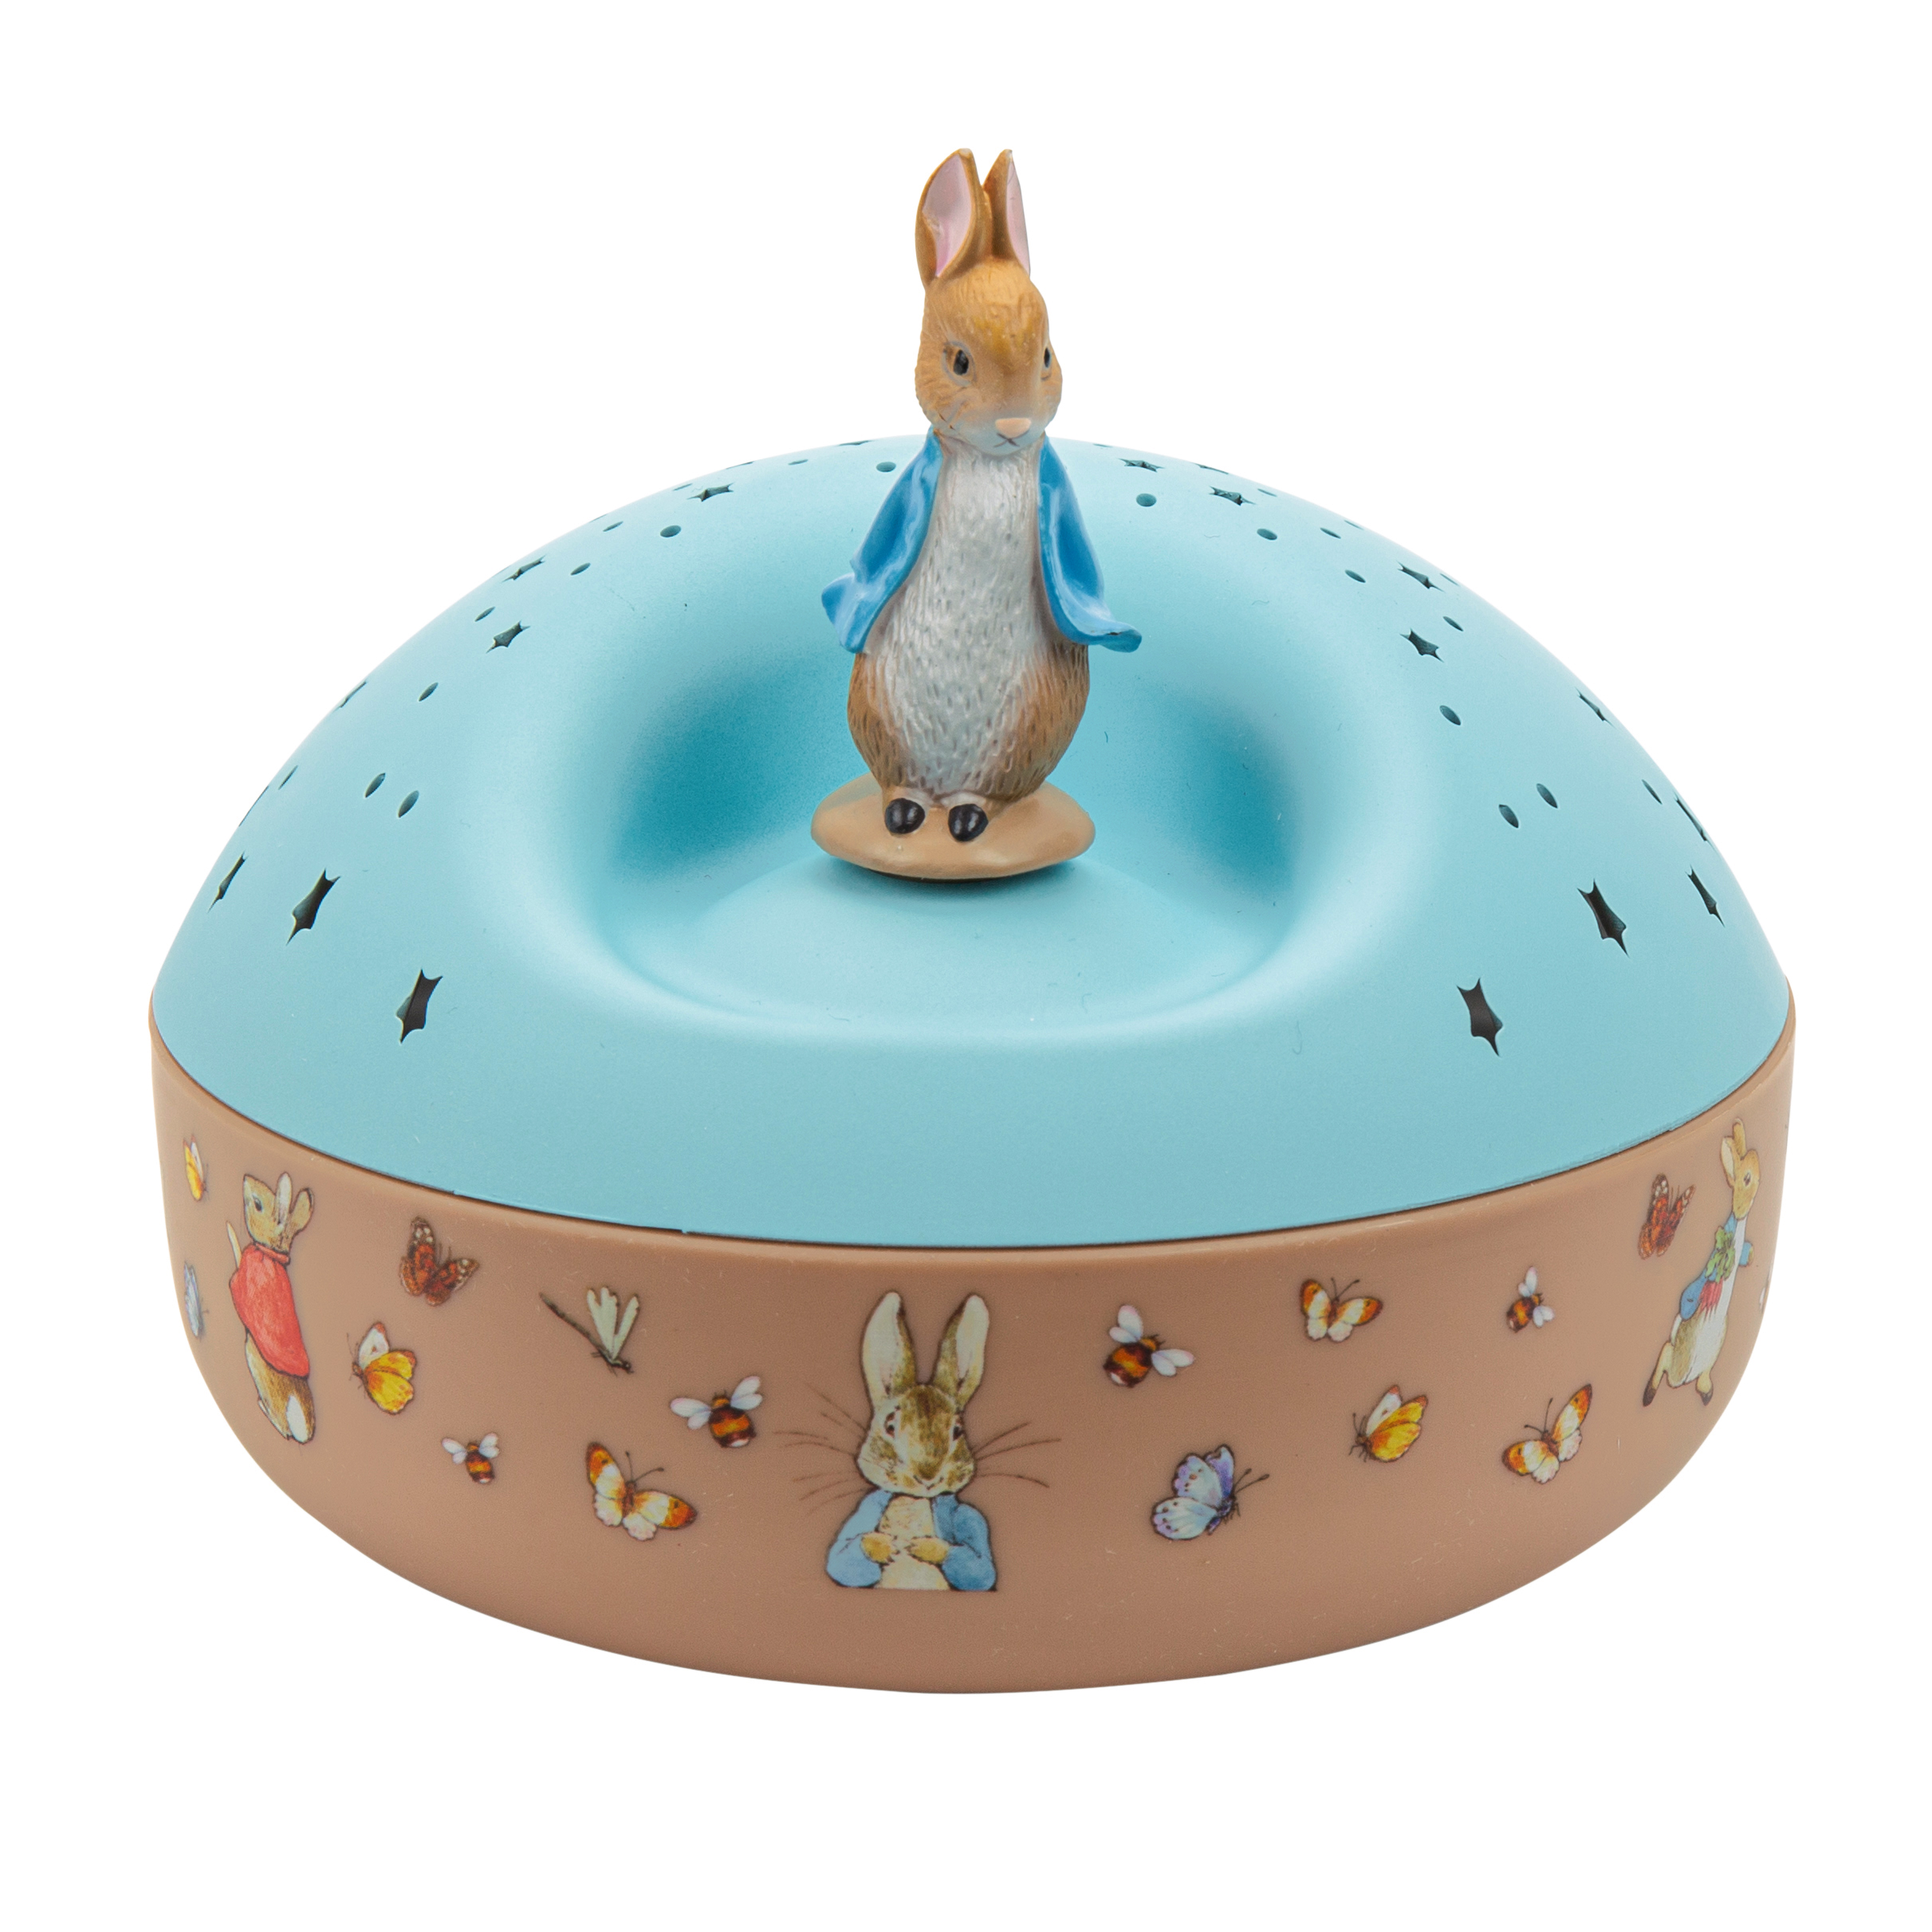 Trousselier Night Light Star Projector with Music Peter Rabbit 12cm